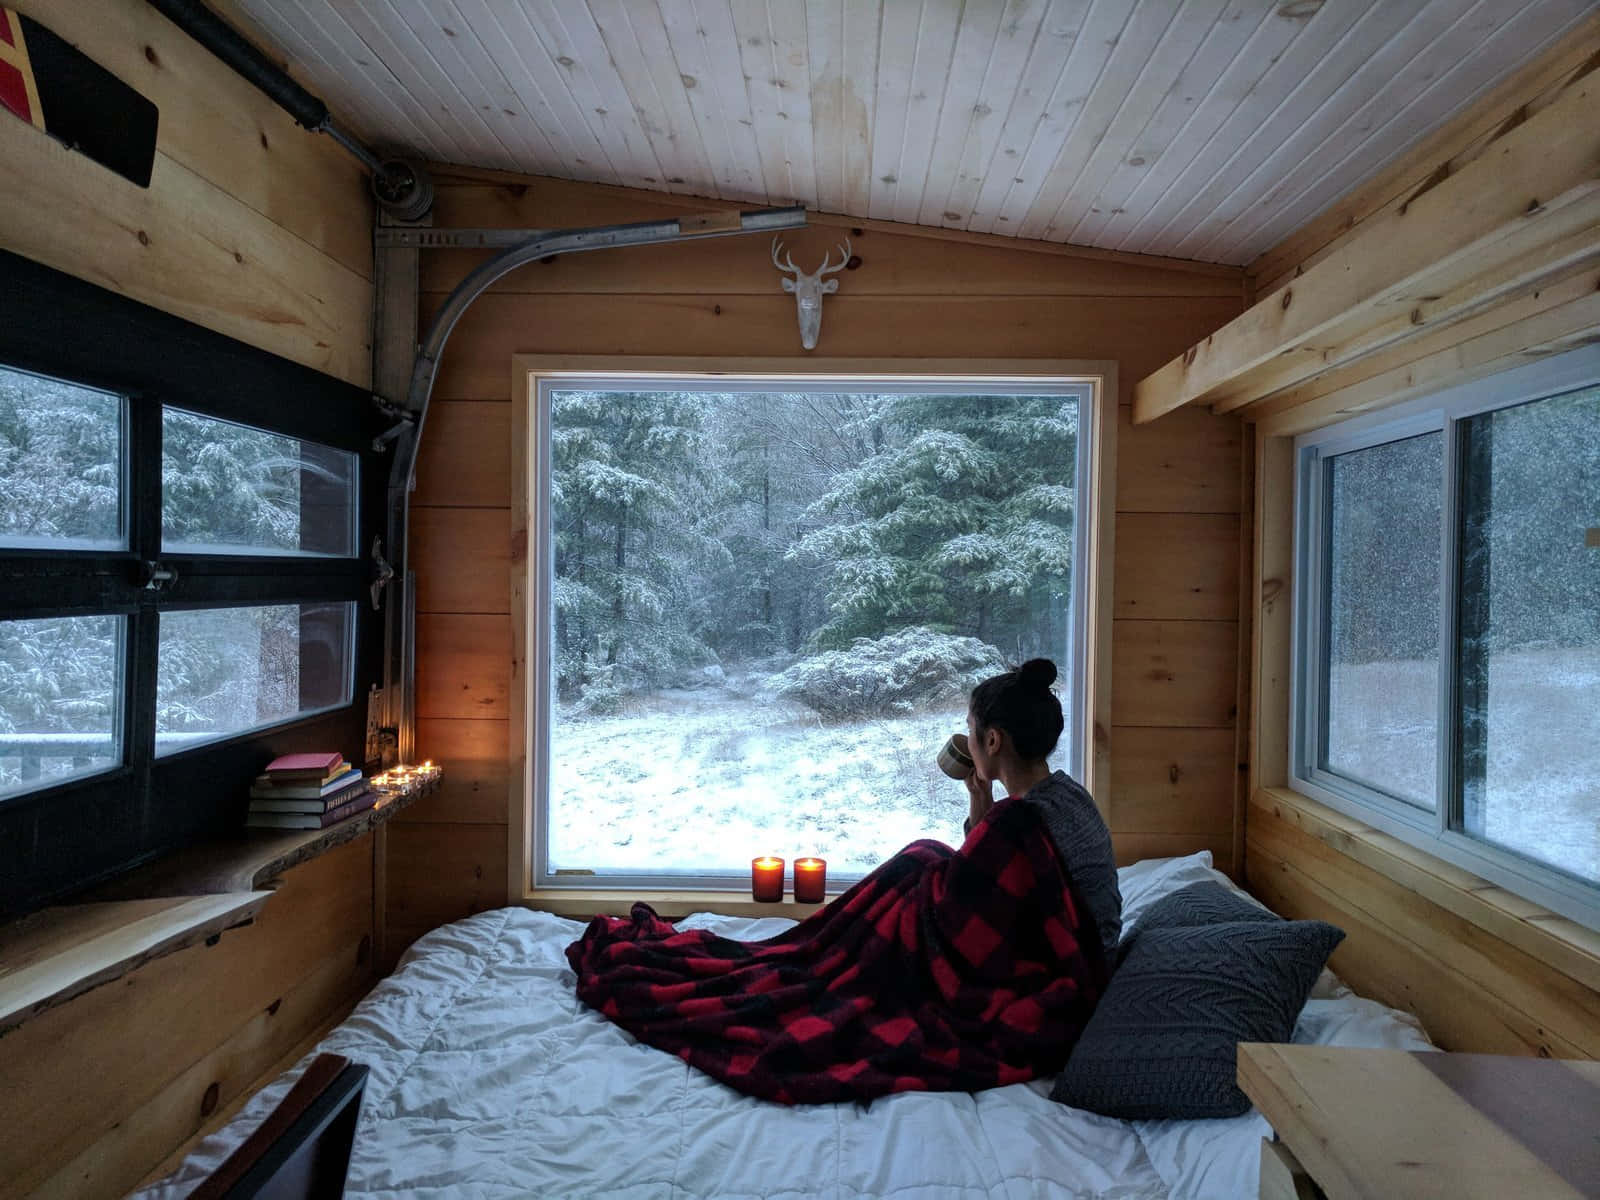 Cozy Winter Cabin Surrounded by Snowy Forest Wallpaper